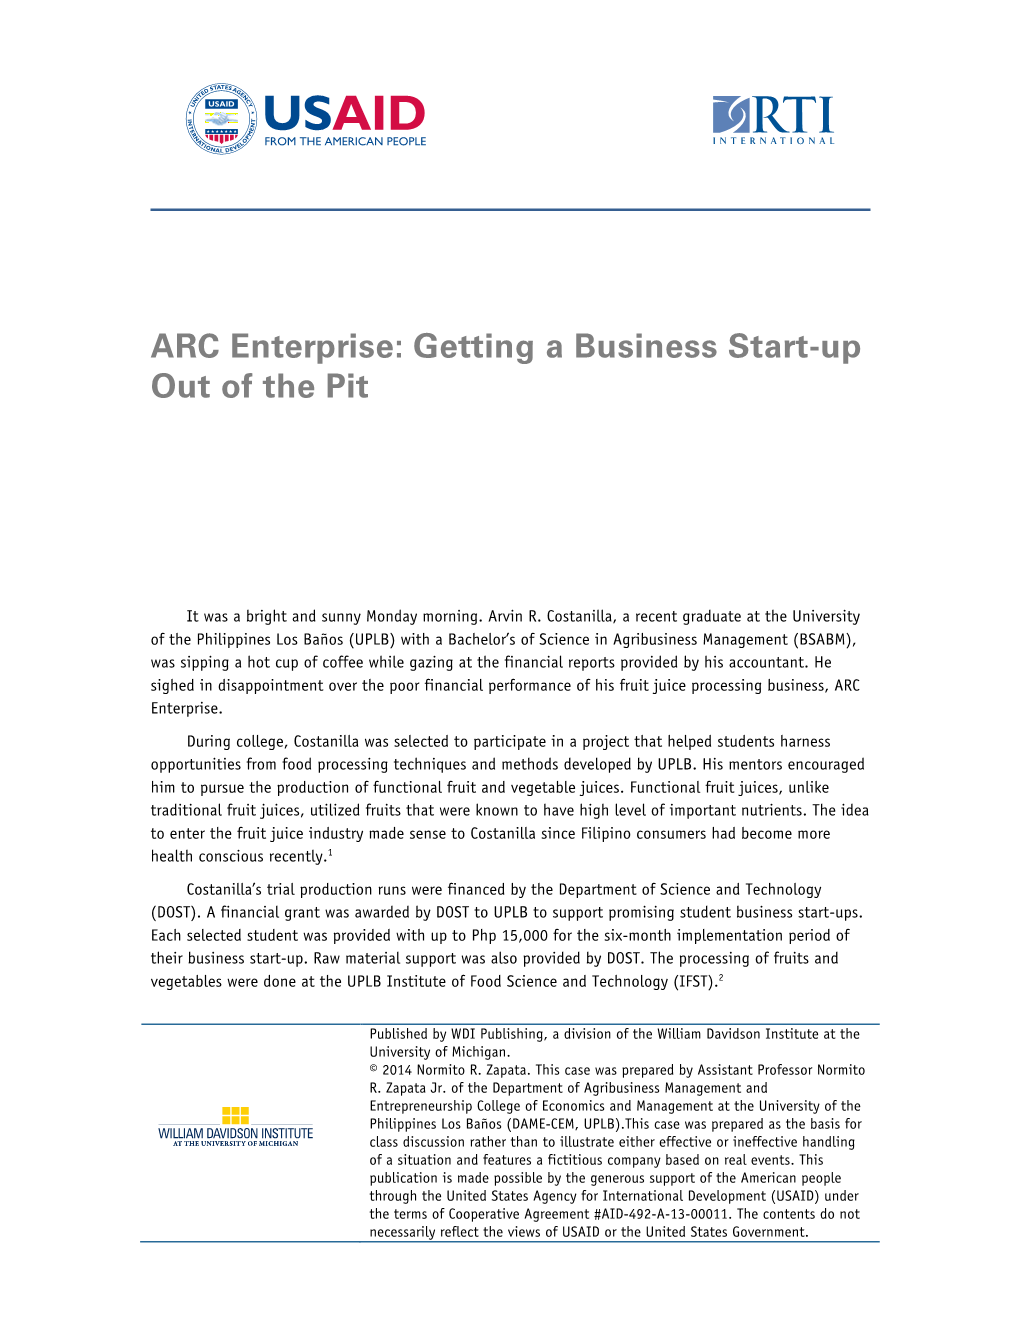 ARC Enterprise: Getting a Business Start-Up out of the Pit